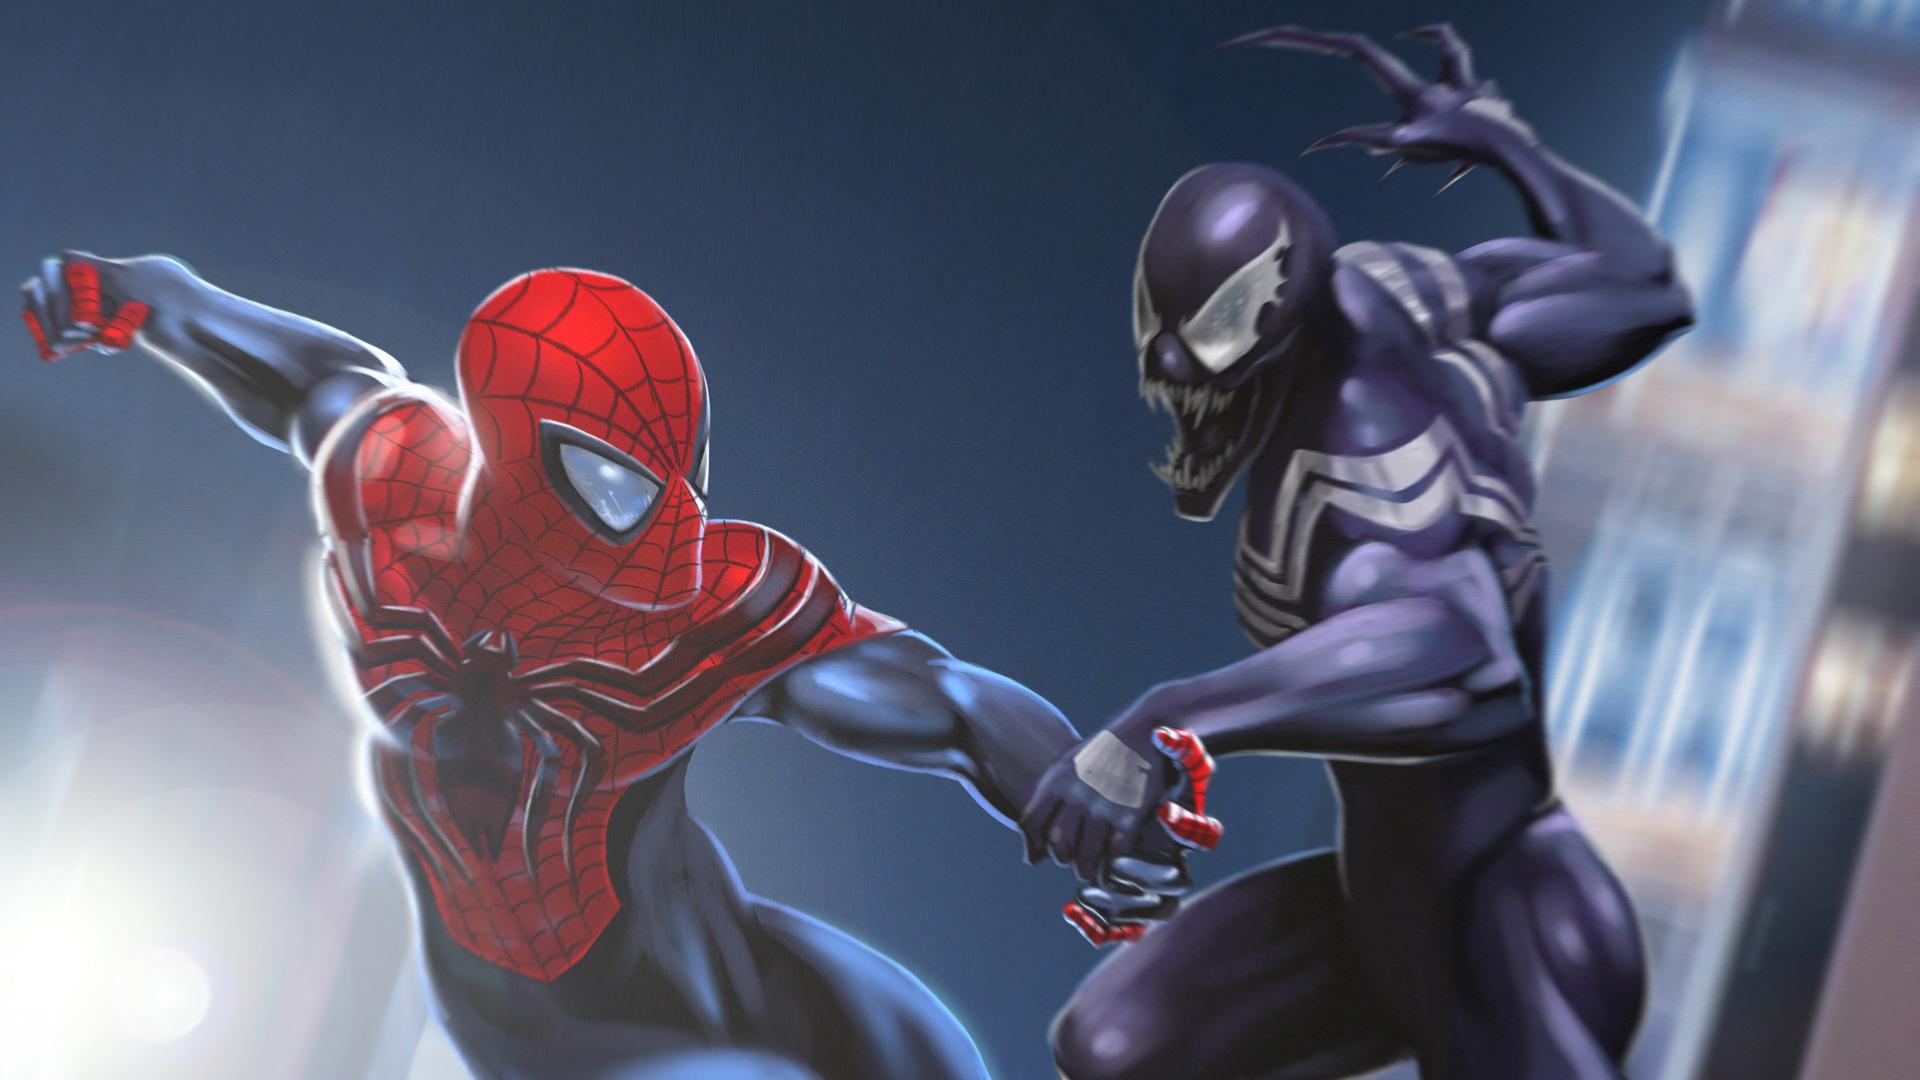 Venom Vs Spiderman Art, HD Superheroes, 4k Wallpapers, Image, Backgrounds, Photos and Pictures